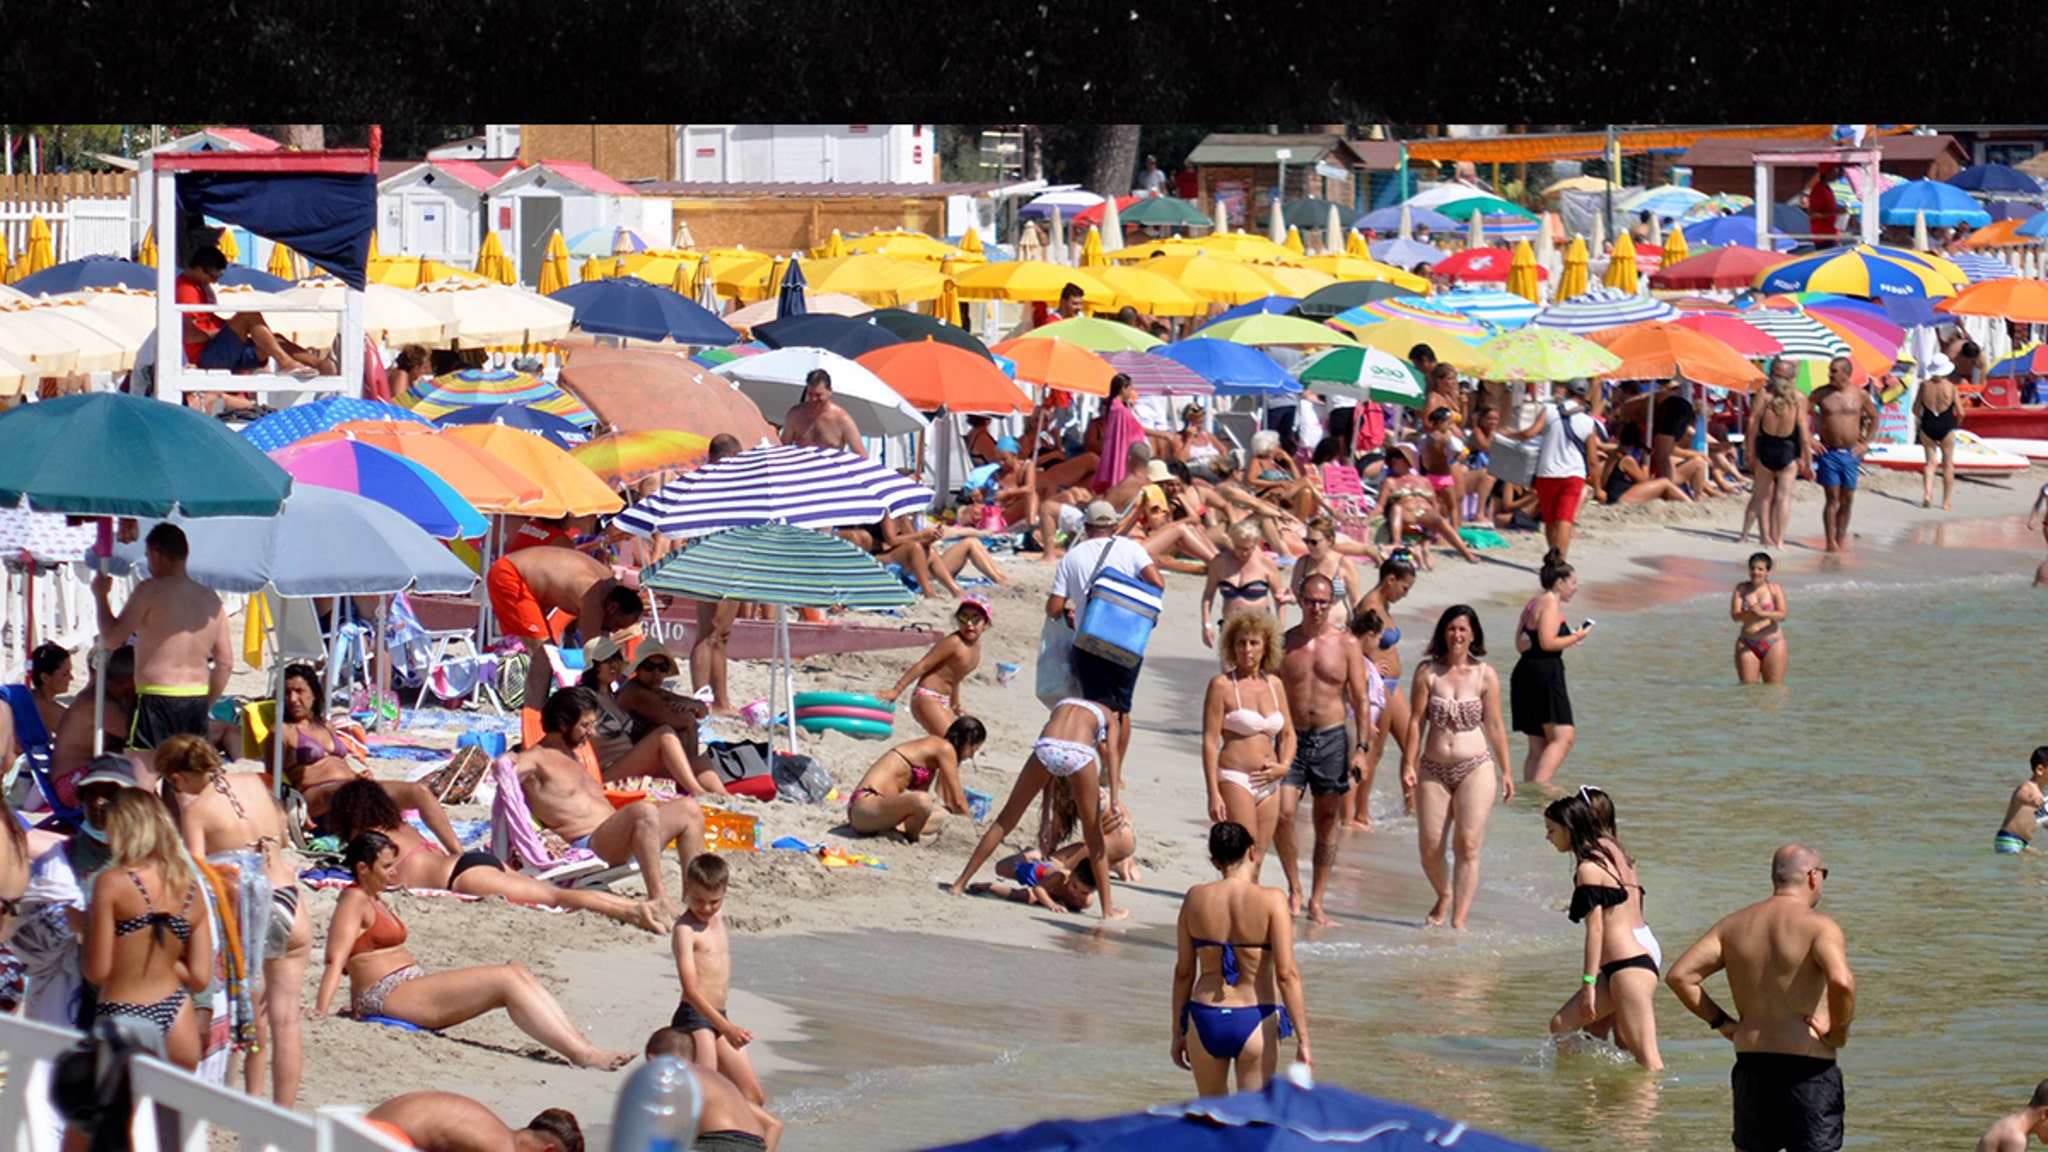 Europeans Flock to Beaches Without Masks as Vacation Season Begins